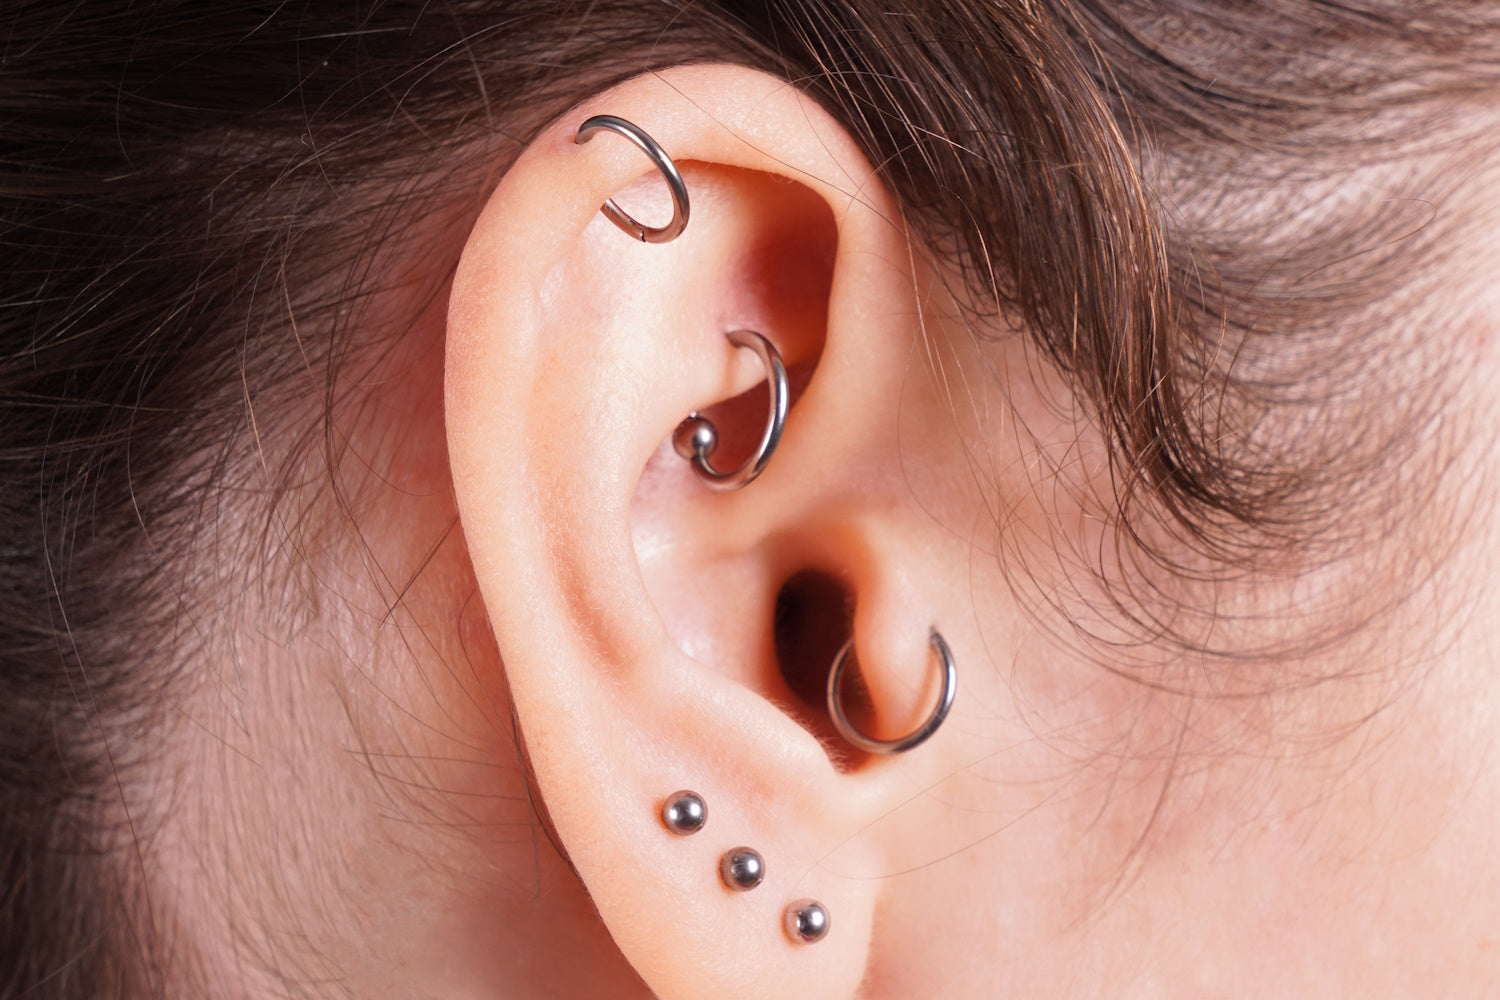 A rook, tragus, and helix piercing on the ear of a woman.